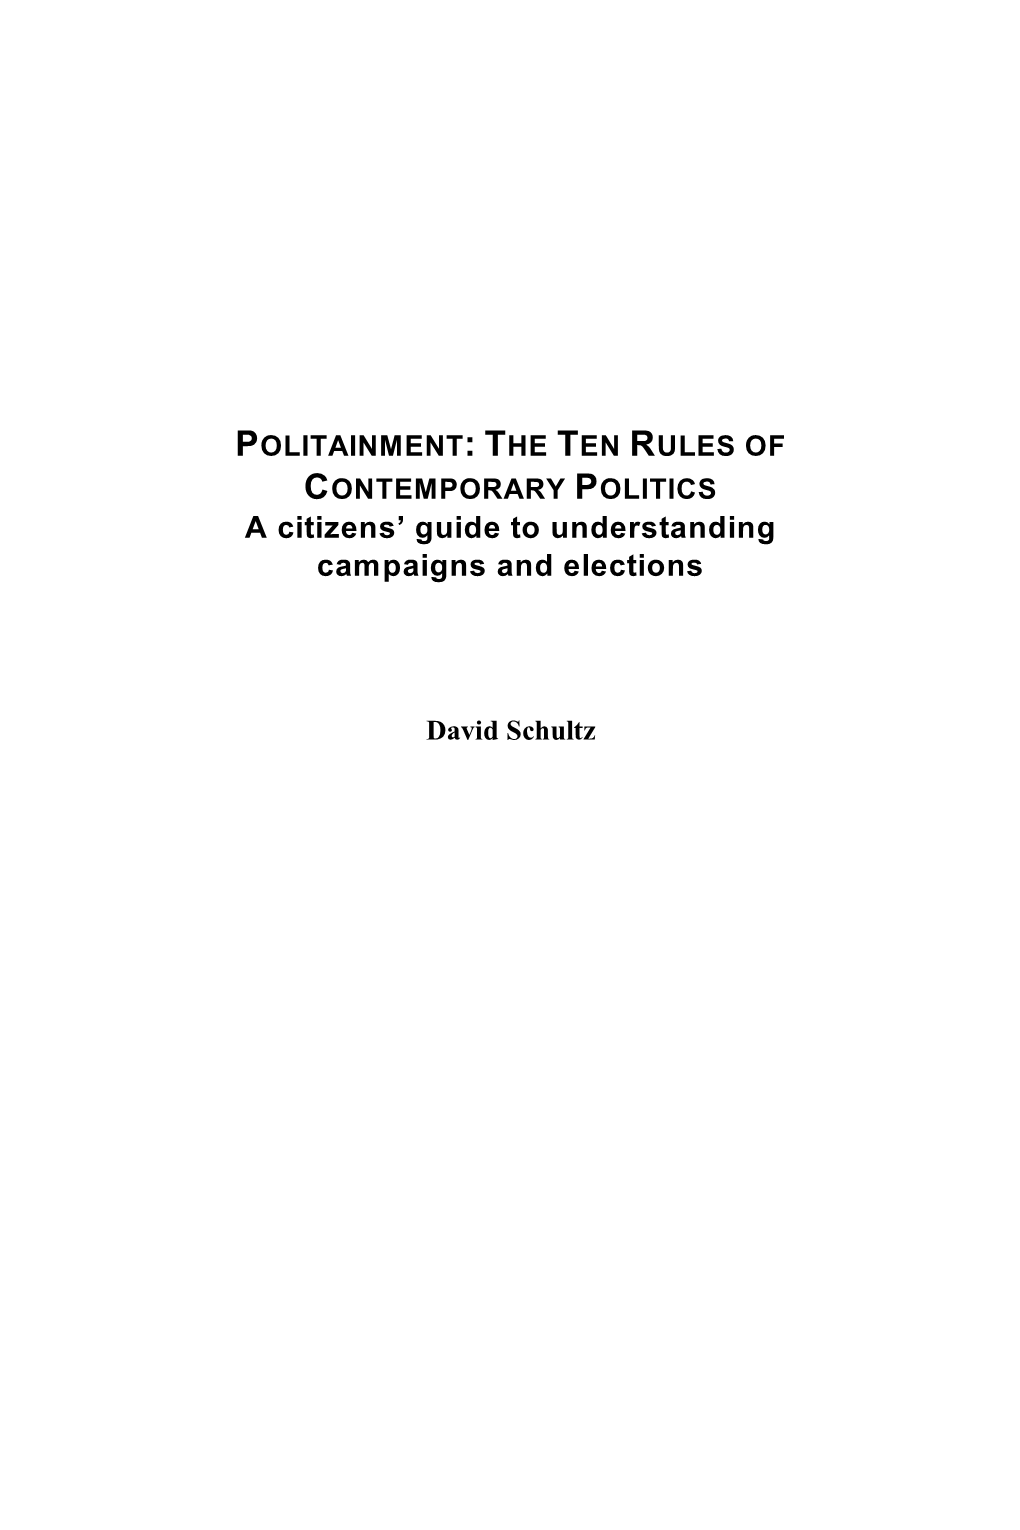 A Citizens' Guide to Understanding Campaigns and Elections